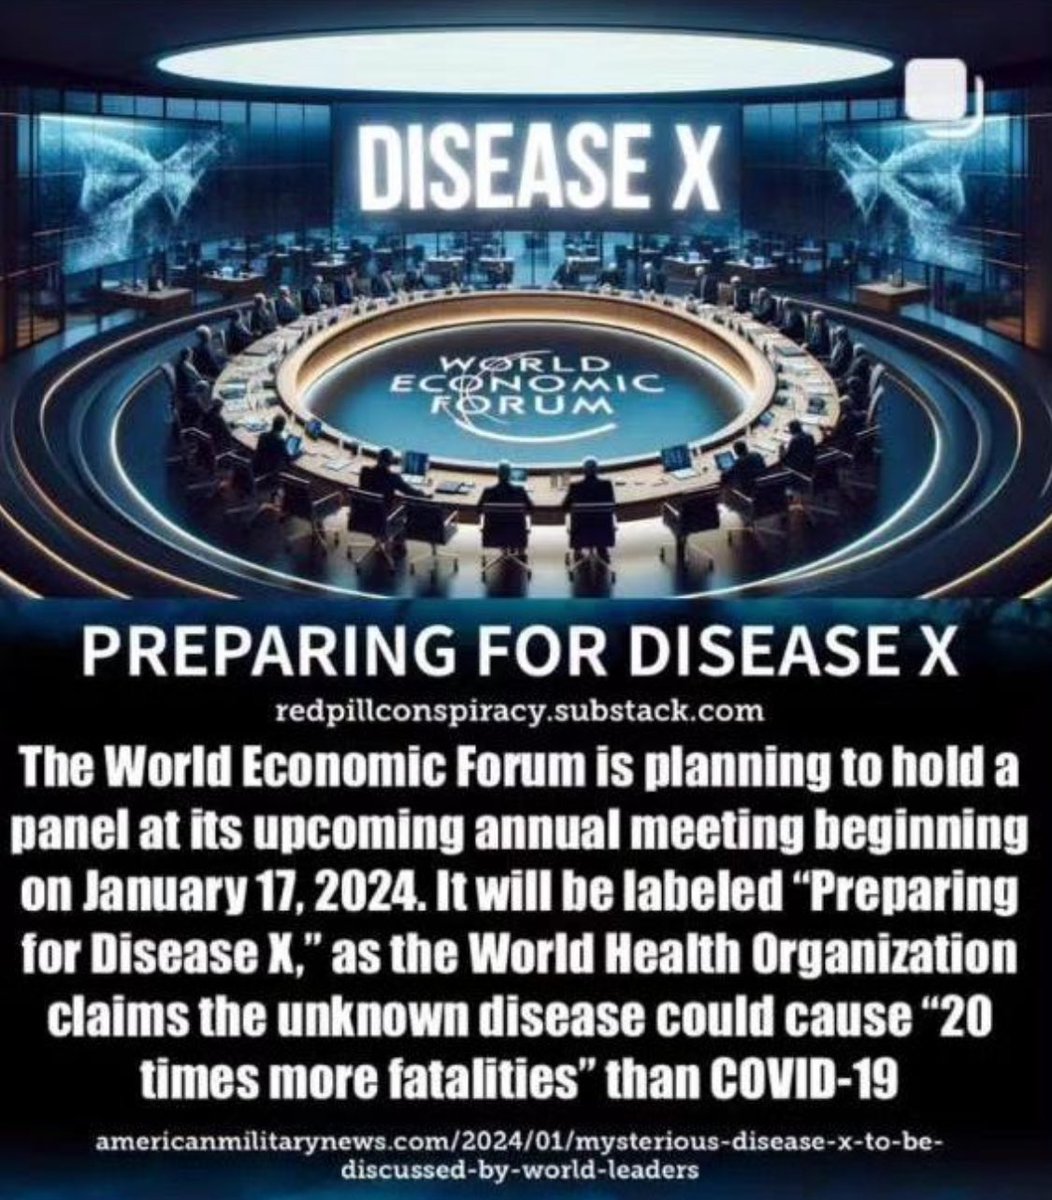 Disease X will be released next year.

It will kill 20 times more than Covid.

It kills children.

They are already working on a 'vaccine' for it. 

Trust the science. 🥴

#Disease_X 
#DiseaseX
#Pandemic
#Science
#GetBoosted 
#WorldEconomicForum2024 
#WorldHealthOrganization